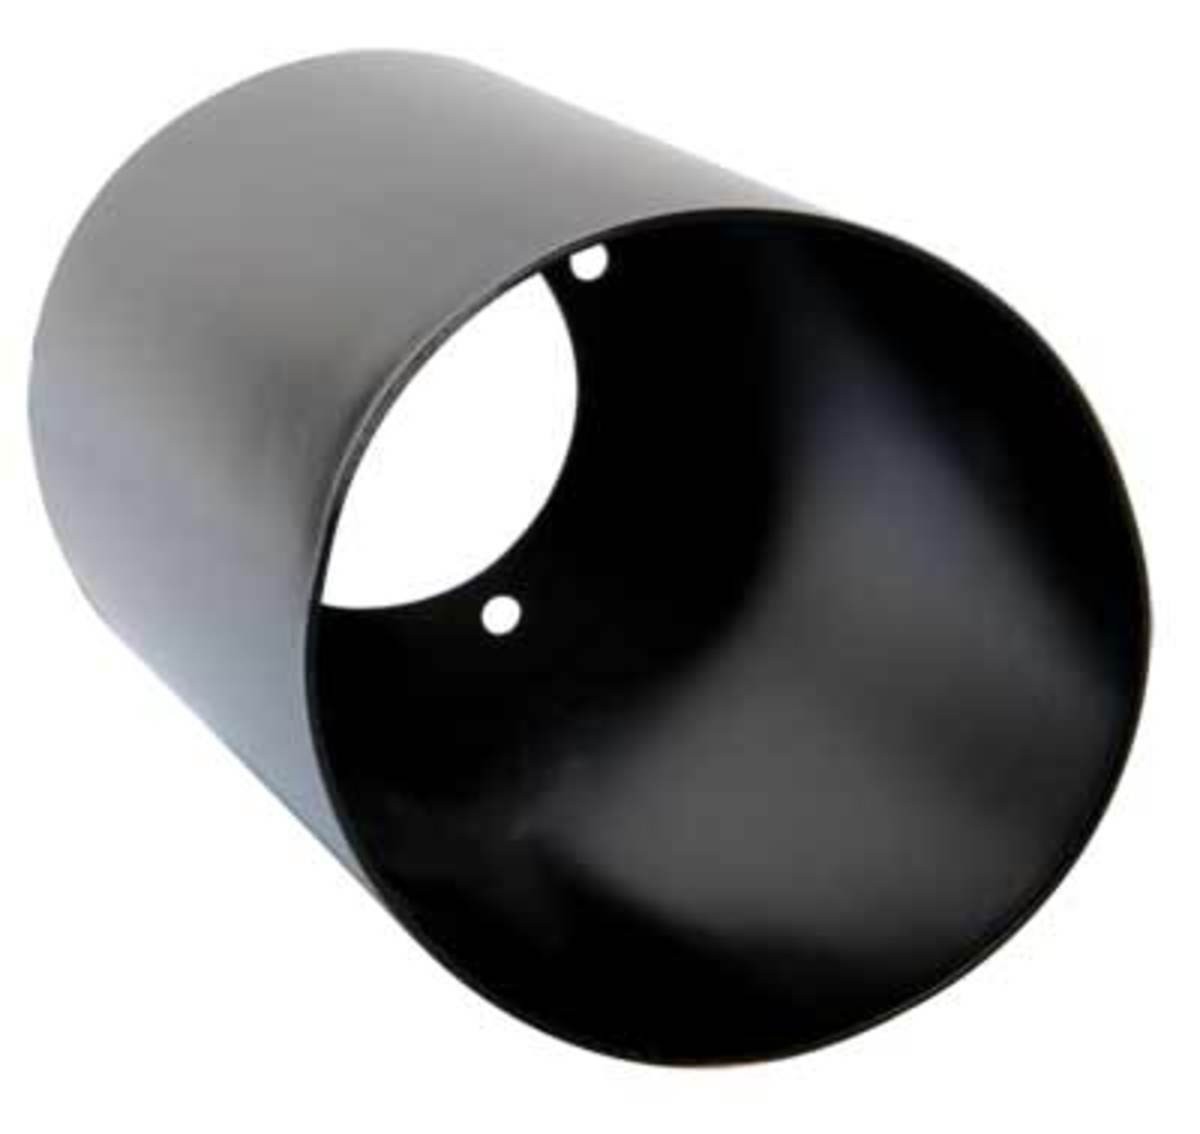 Pipe type guard for doorknob locks and cylindrical deadbolts